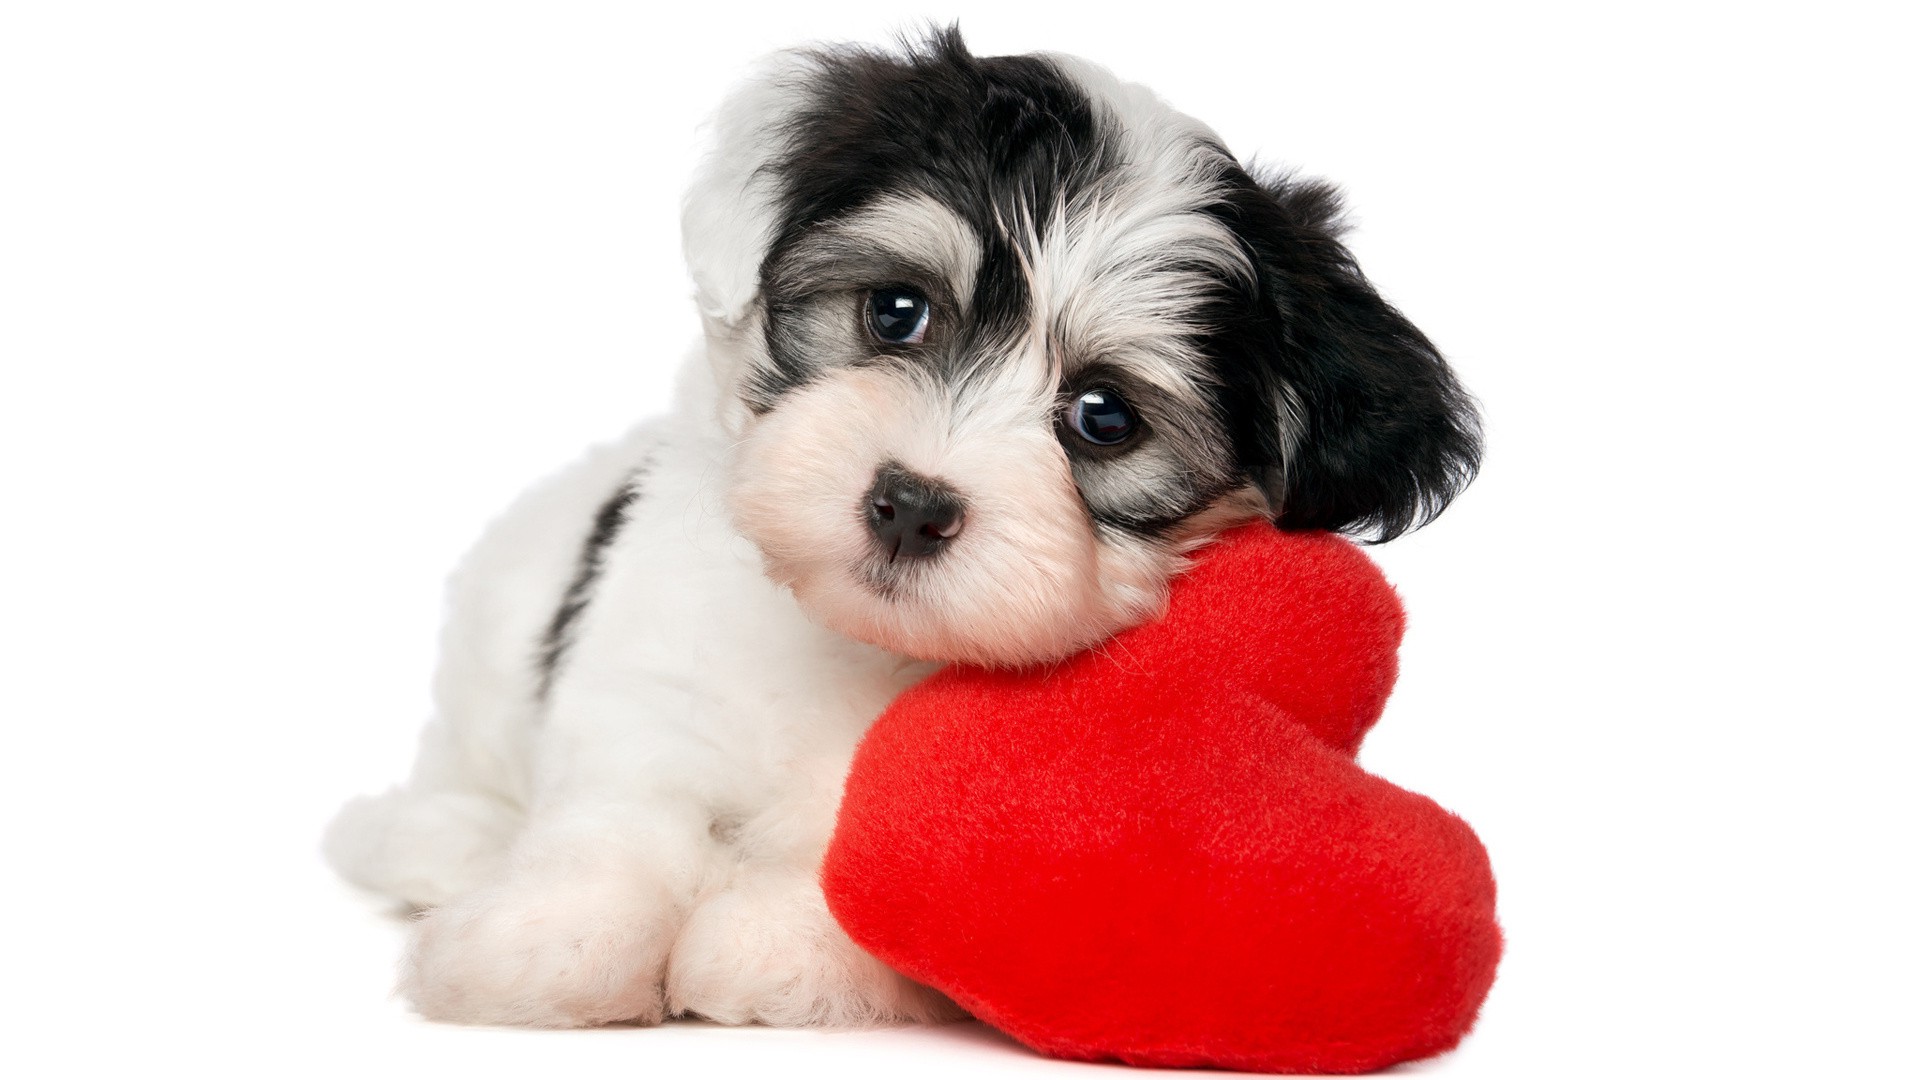 animals, Dog, Simple Background, Pet, Baby Animals, Hearts, White Background, Puppies Wallpaper